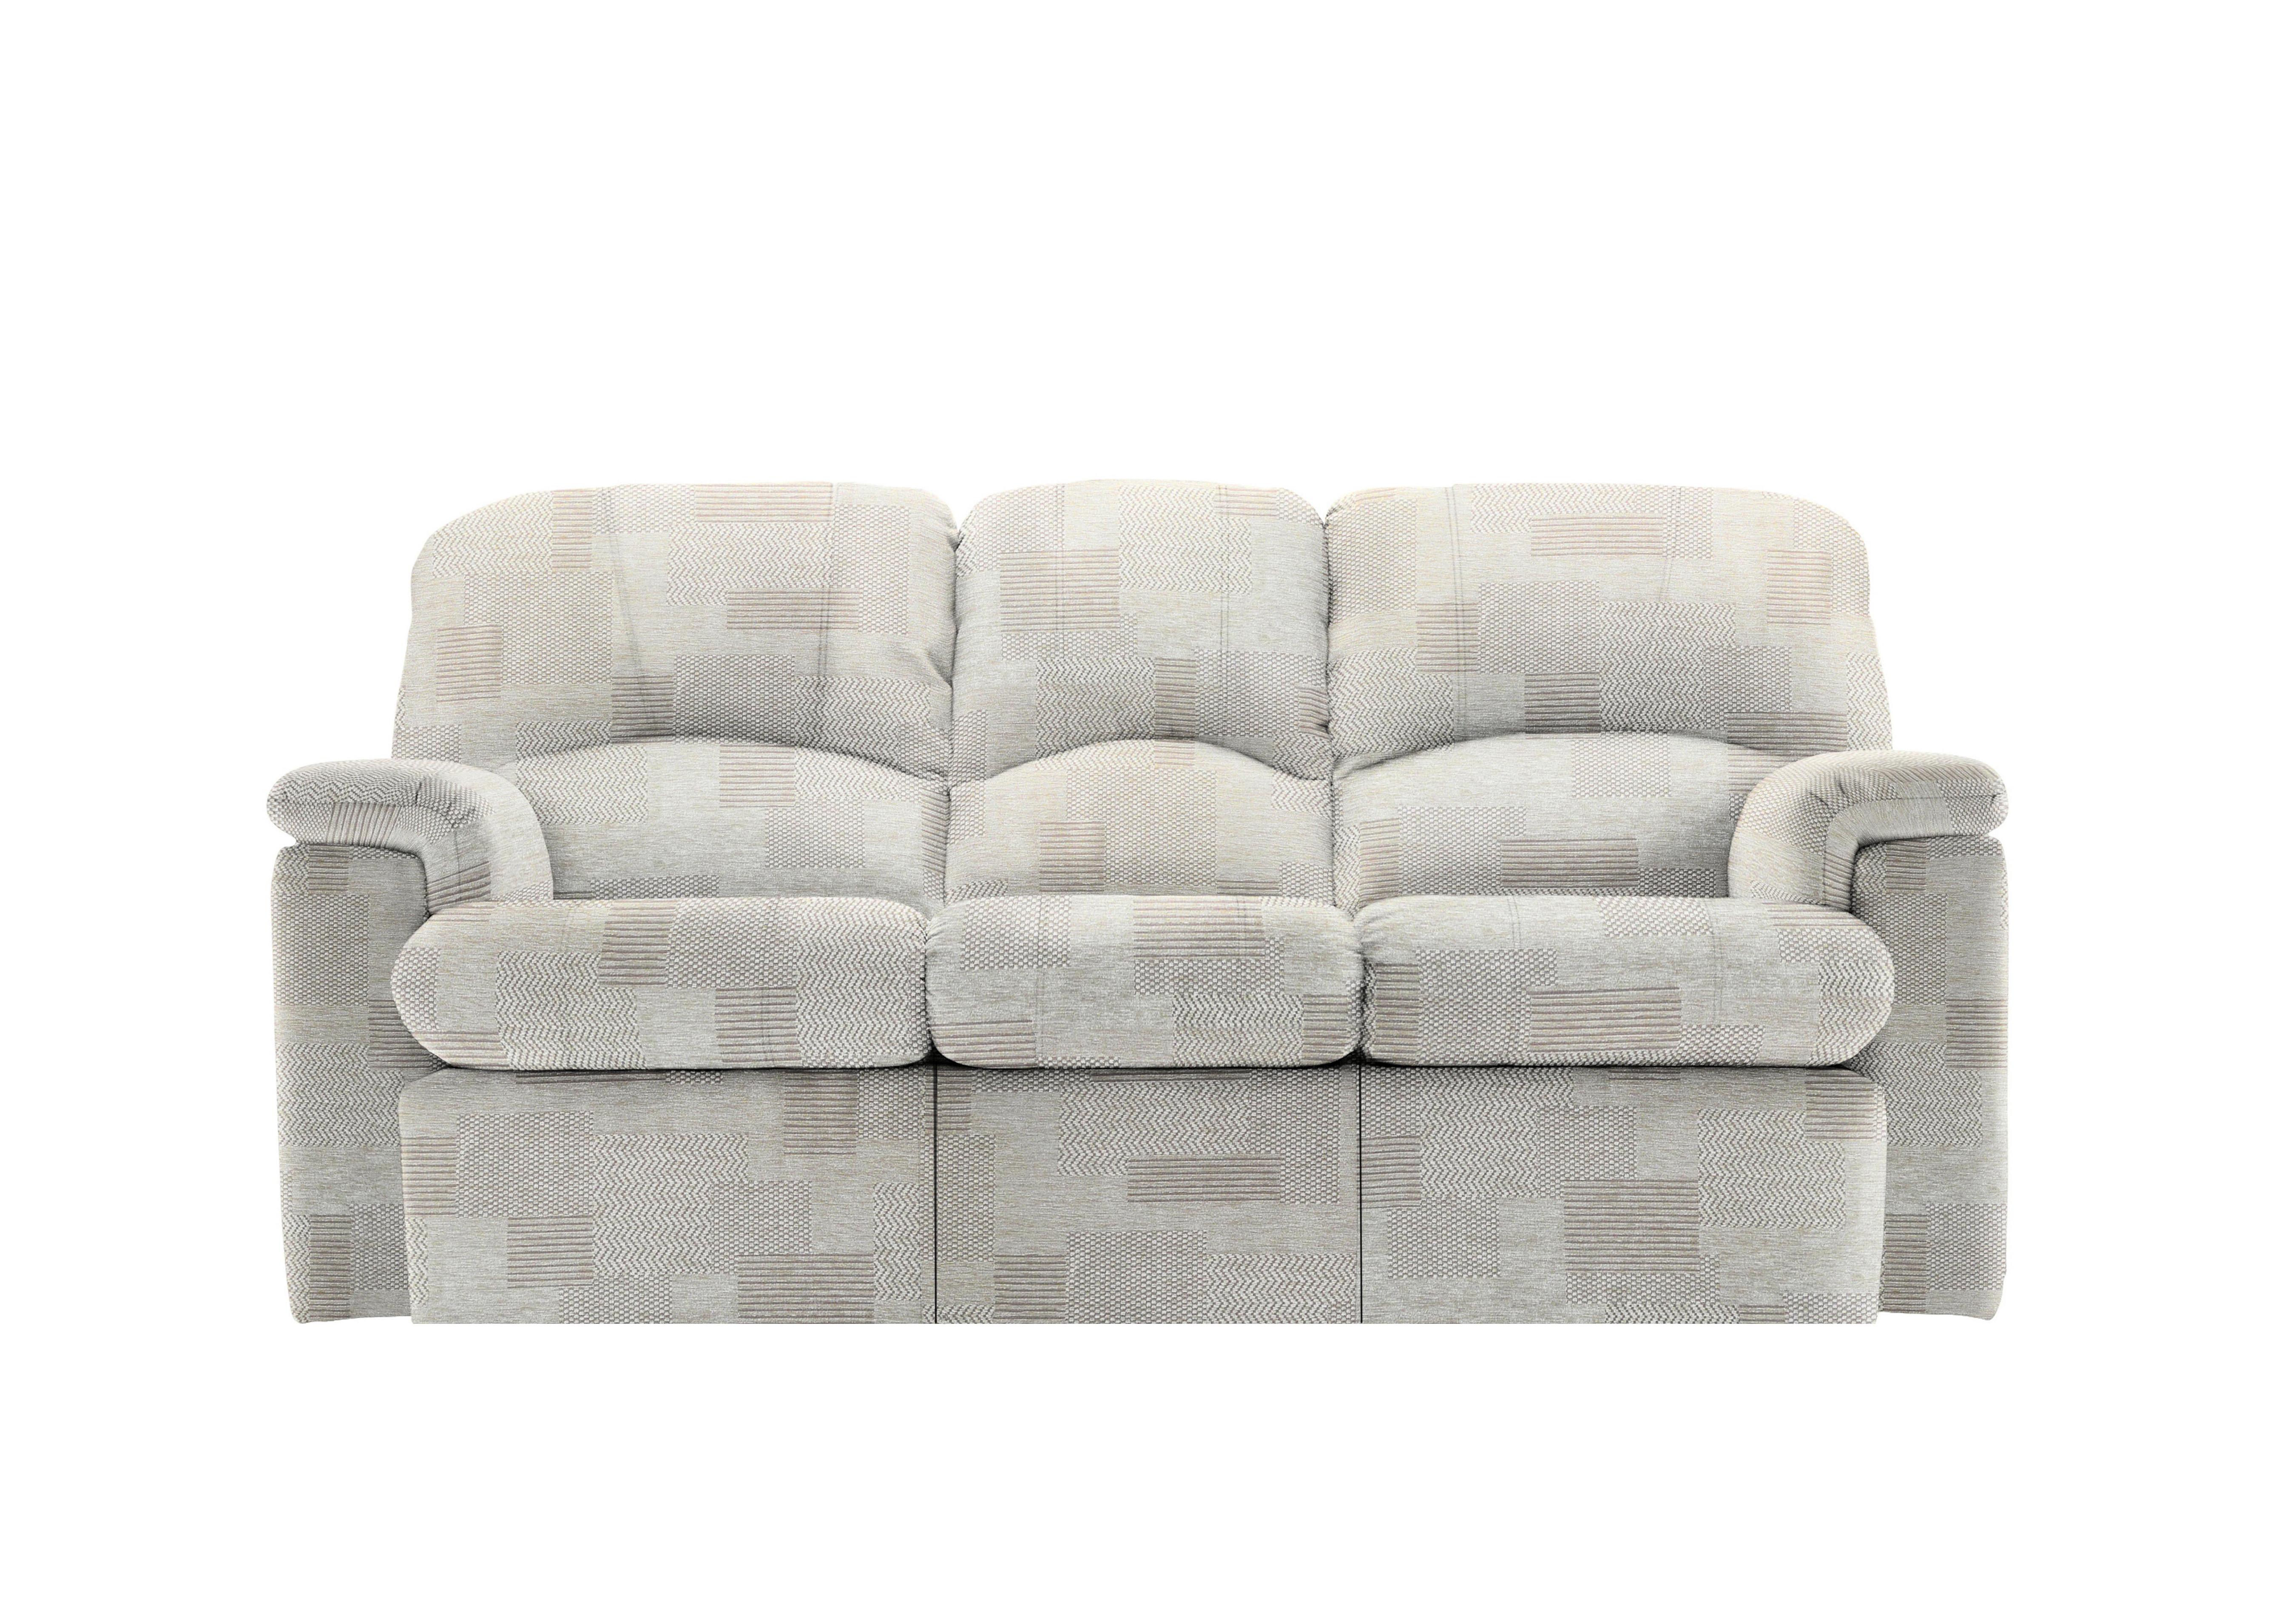 Chloe 3 Seater Fabric Sofa in C008 Checkers Putty on Furniture Village